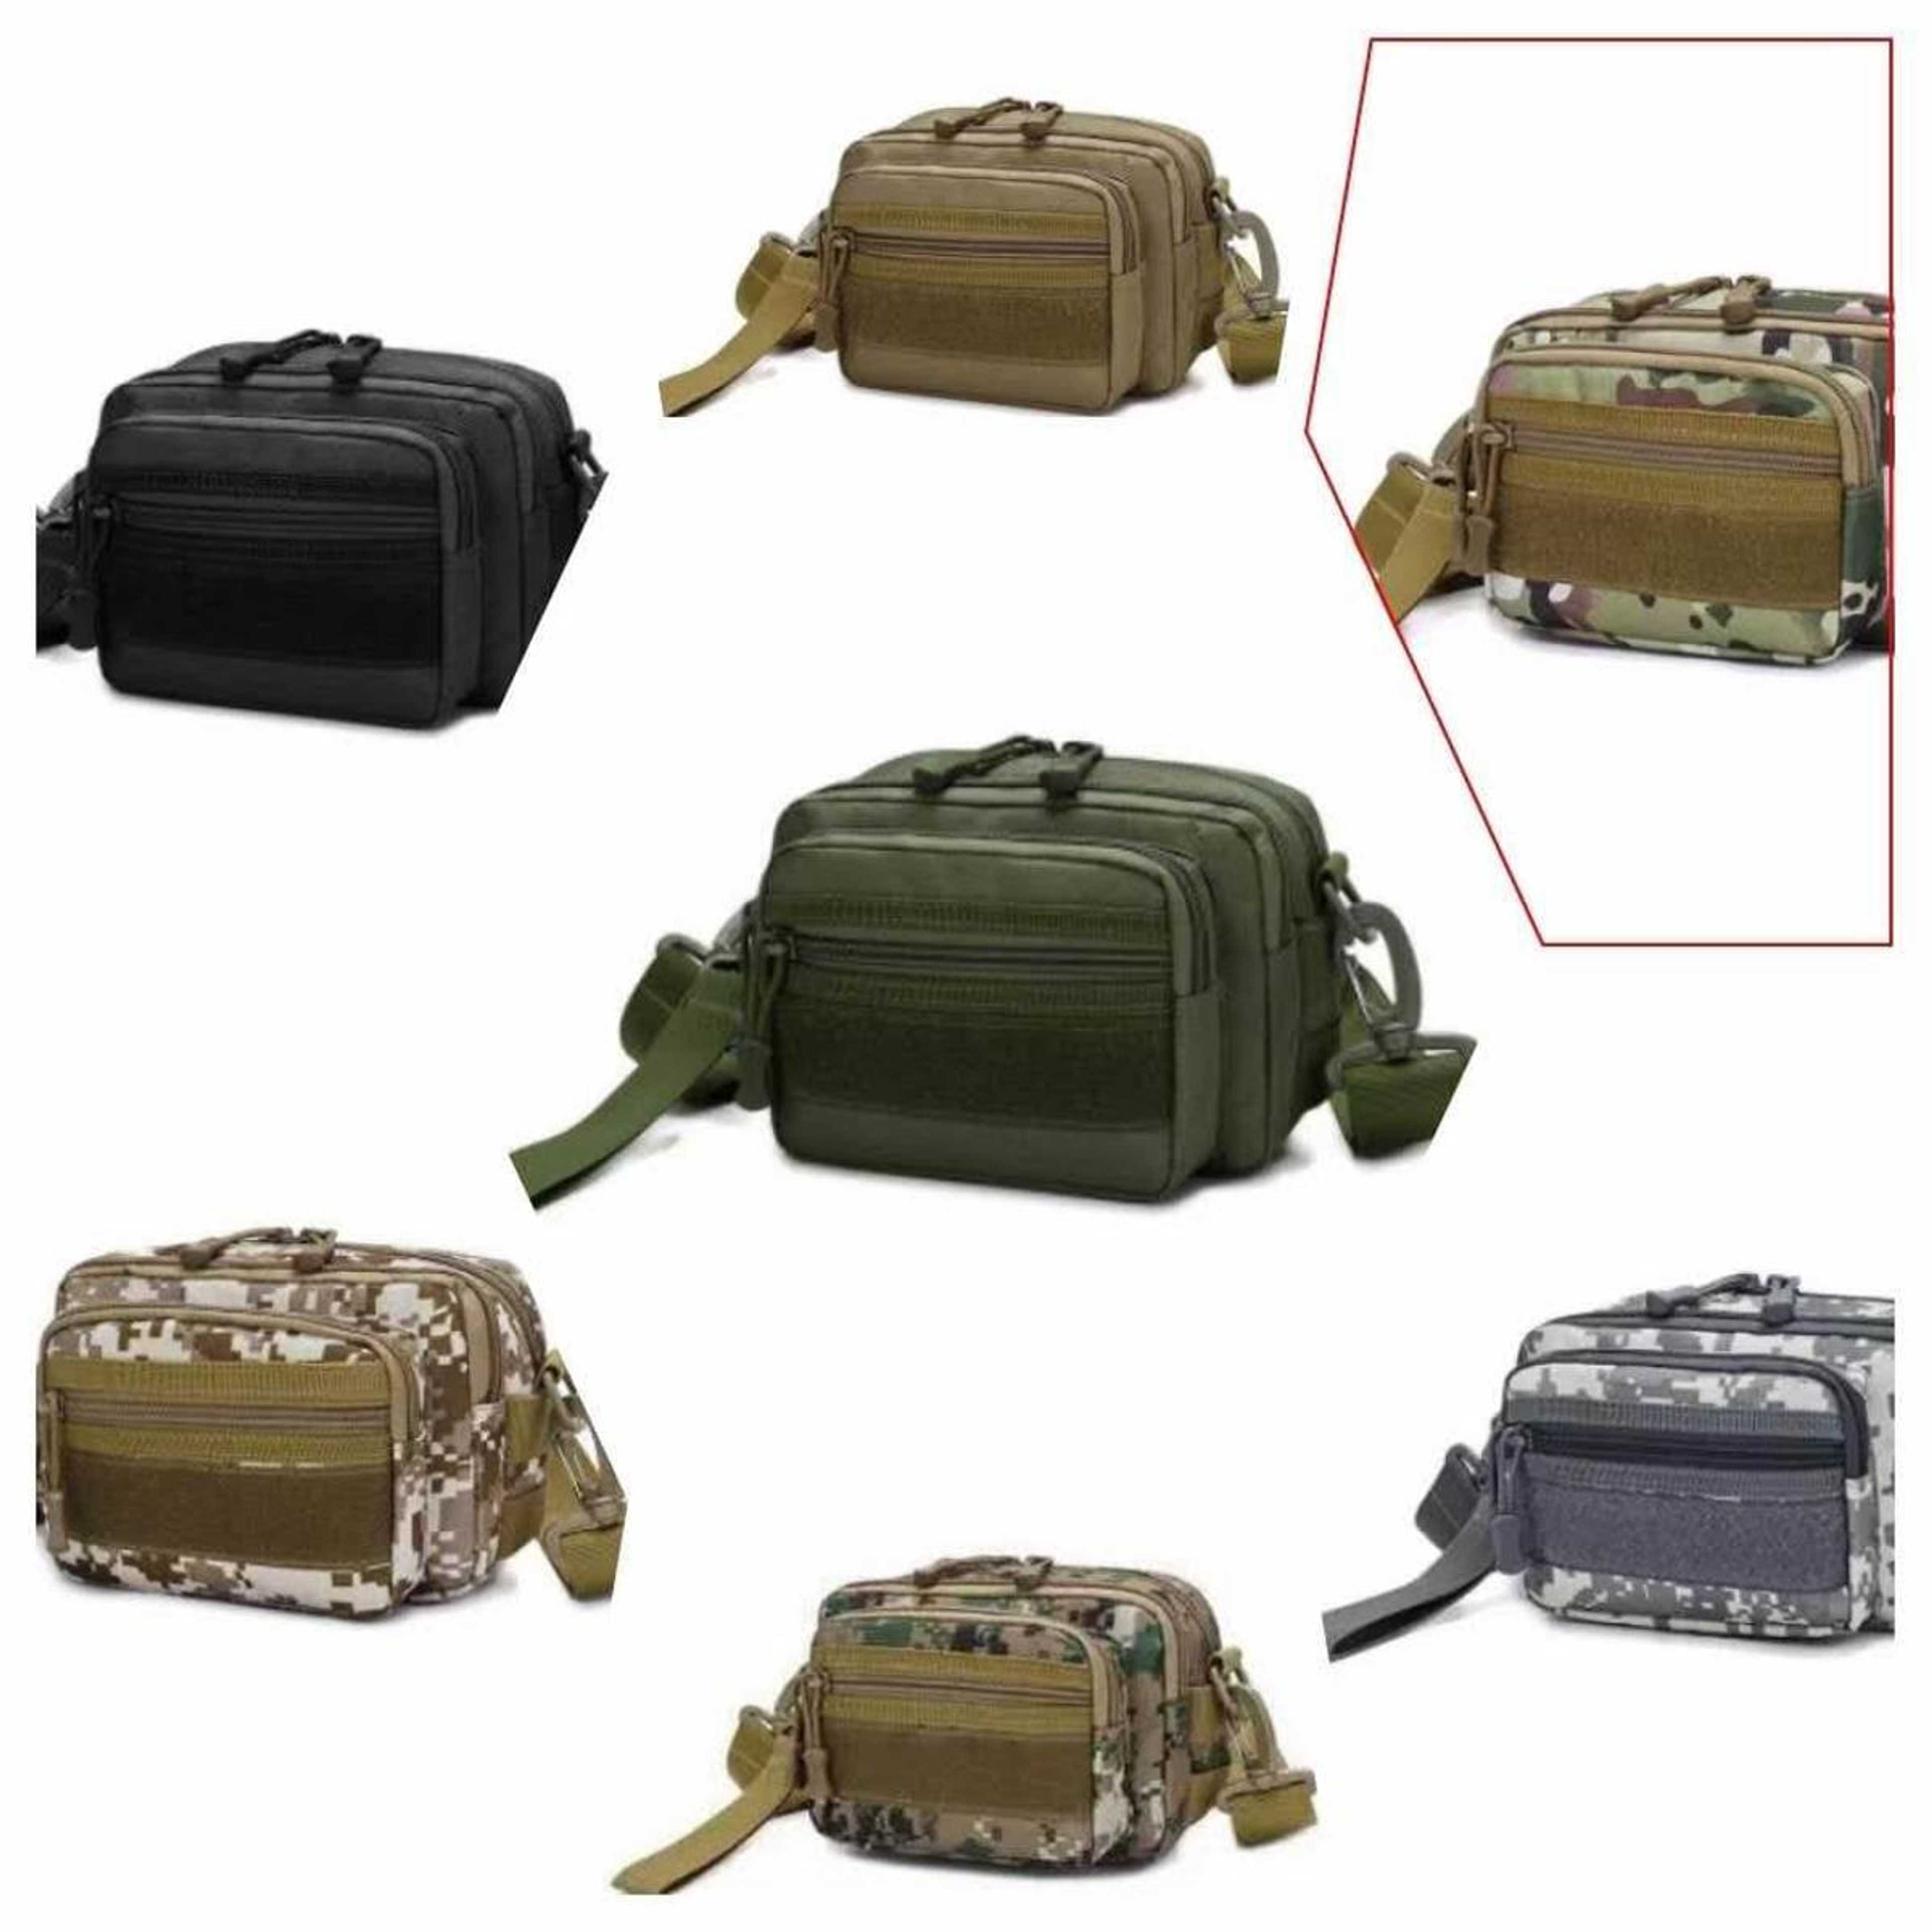 Travail Bag Multifactional for Women Multi Pocket Top Handle Shoulder Bag Waterproof Nylon  Backpack  Molle Utility Admin Pouch